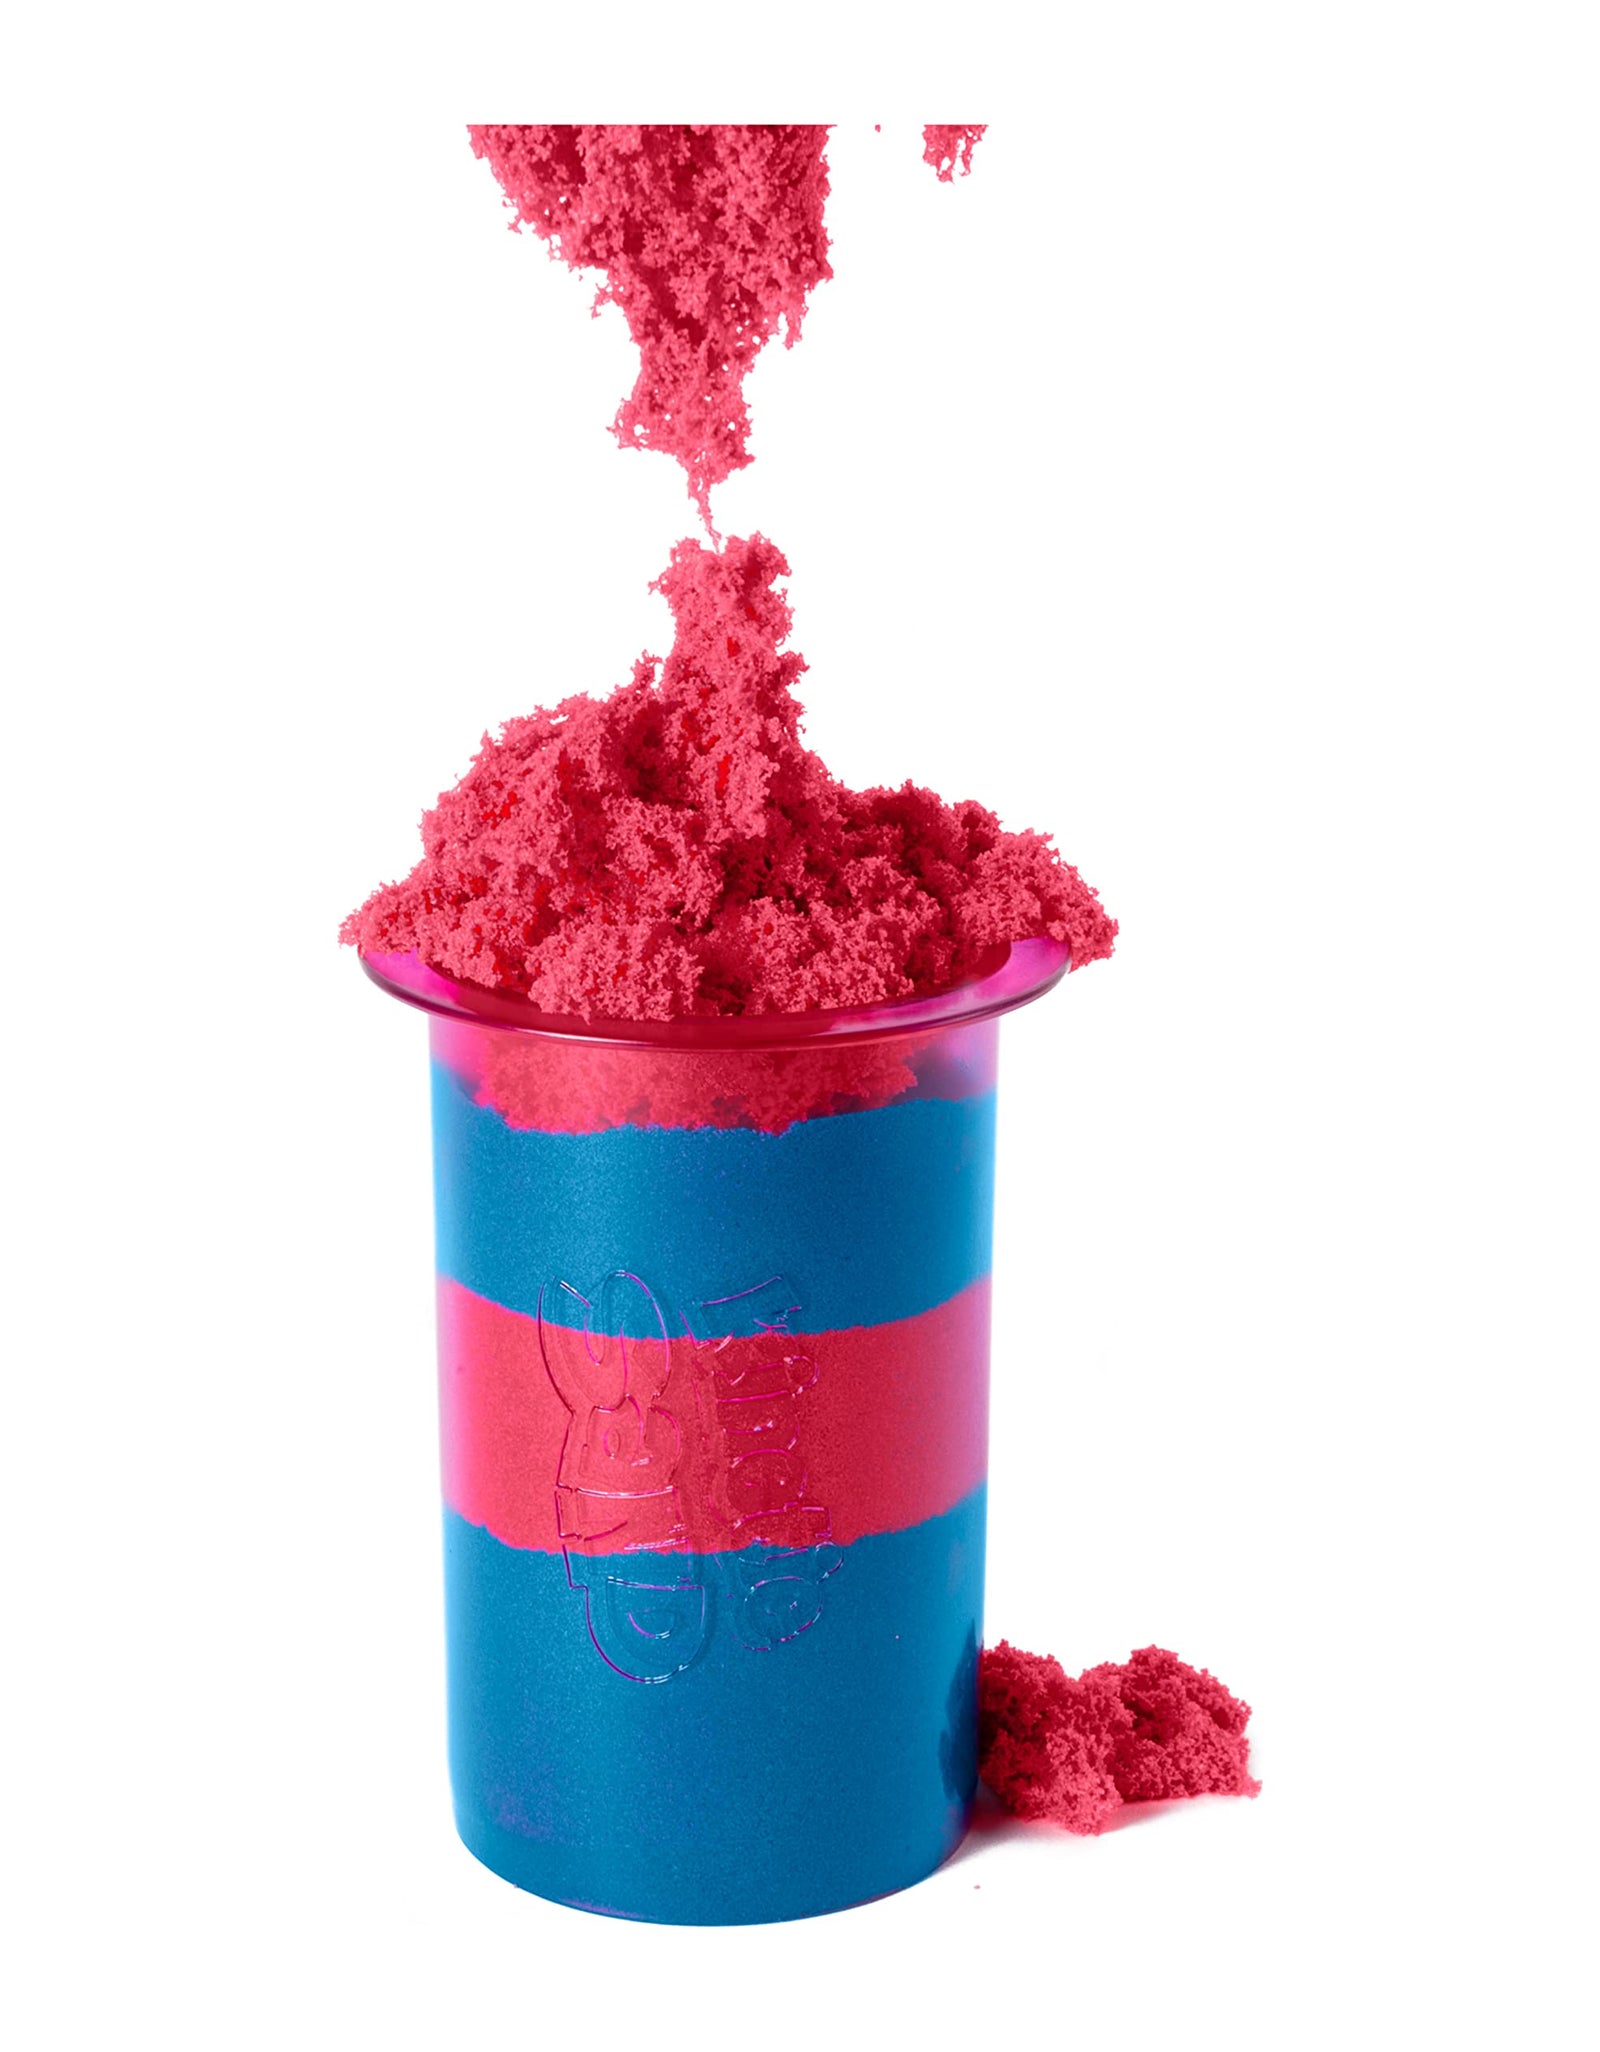 Kinetic Sand, Sandisfying Set with 2lbs of Sand and 10 Tools, for Kids Aged 3 and Up